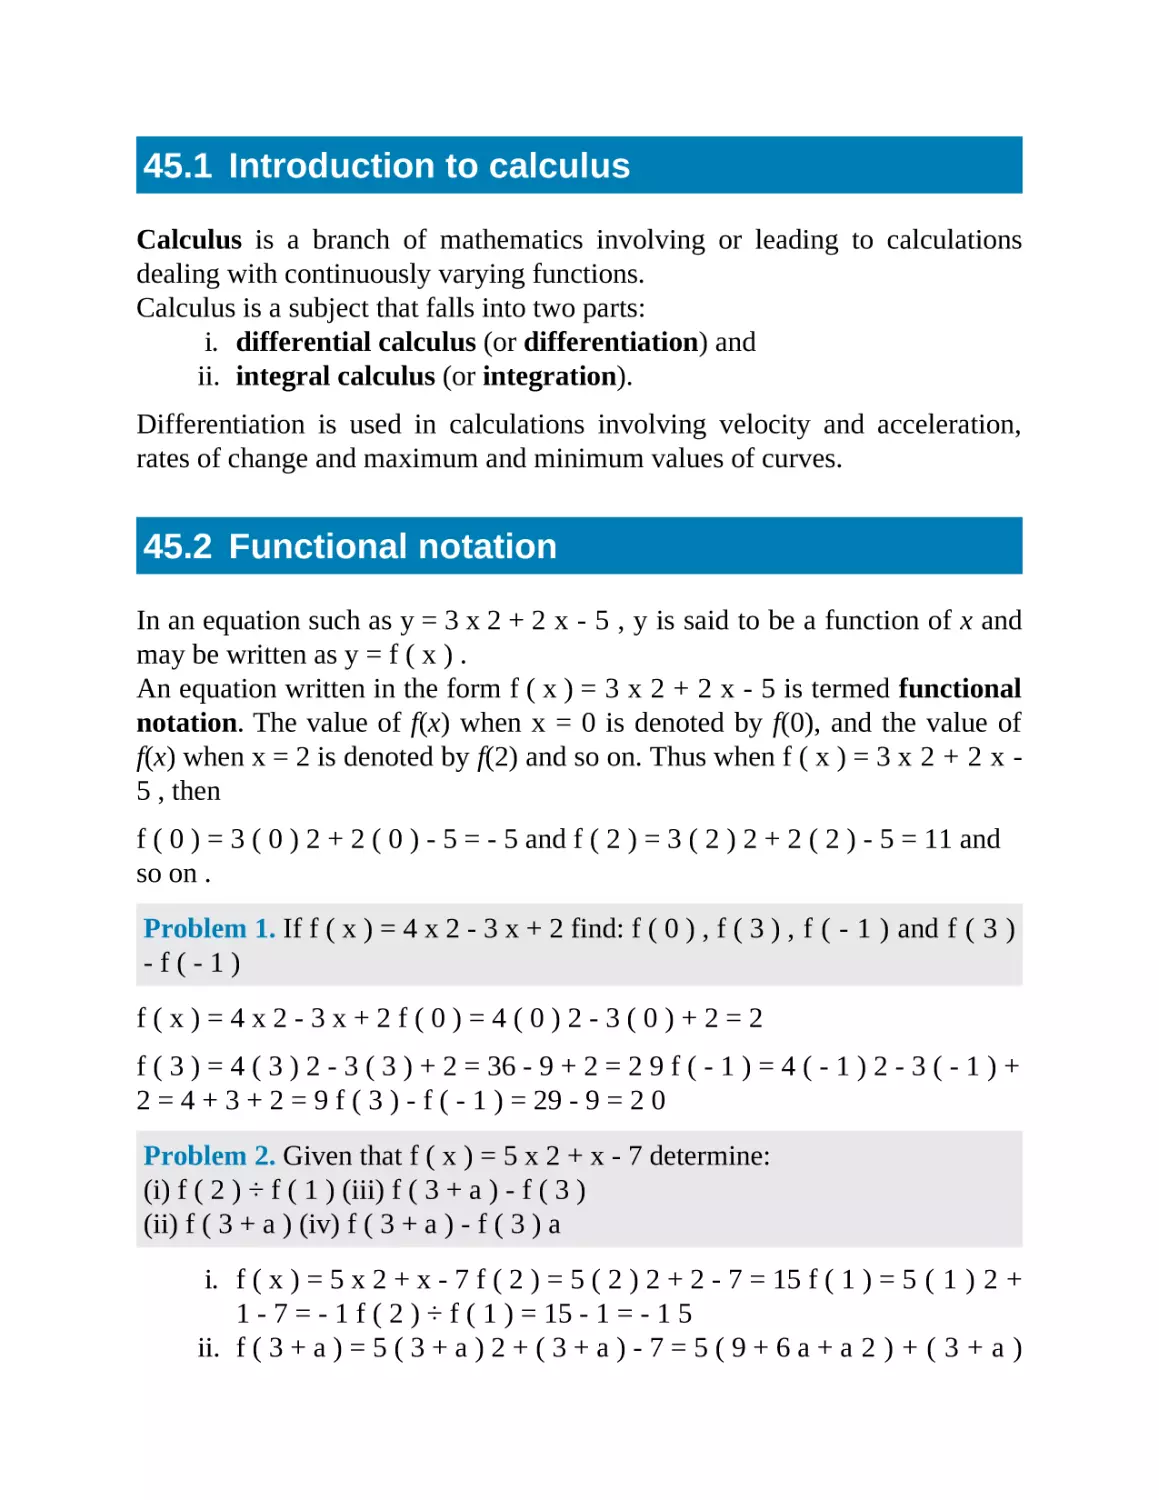 45.1 Introduction to calculus
45.2 Functional notation